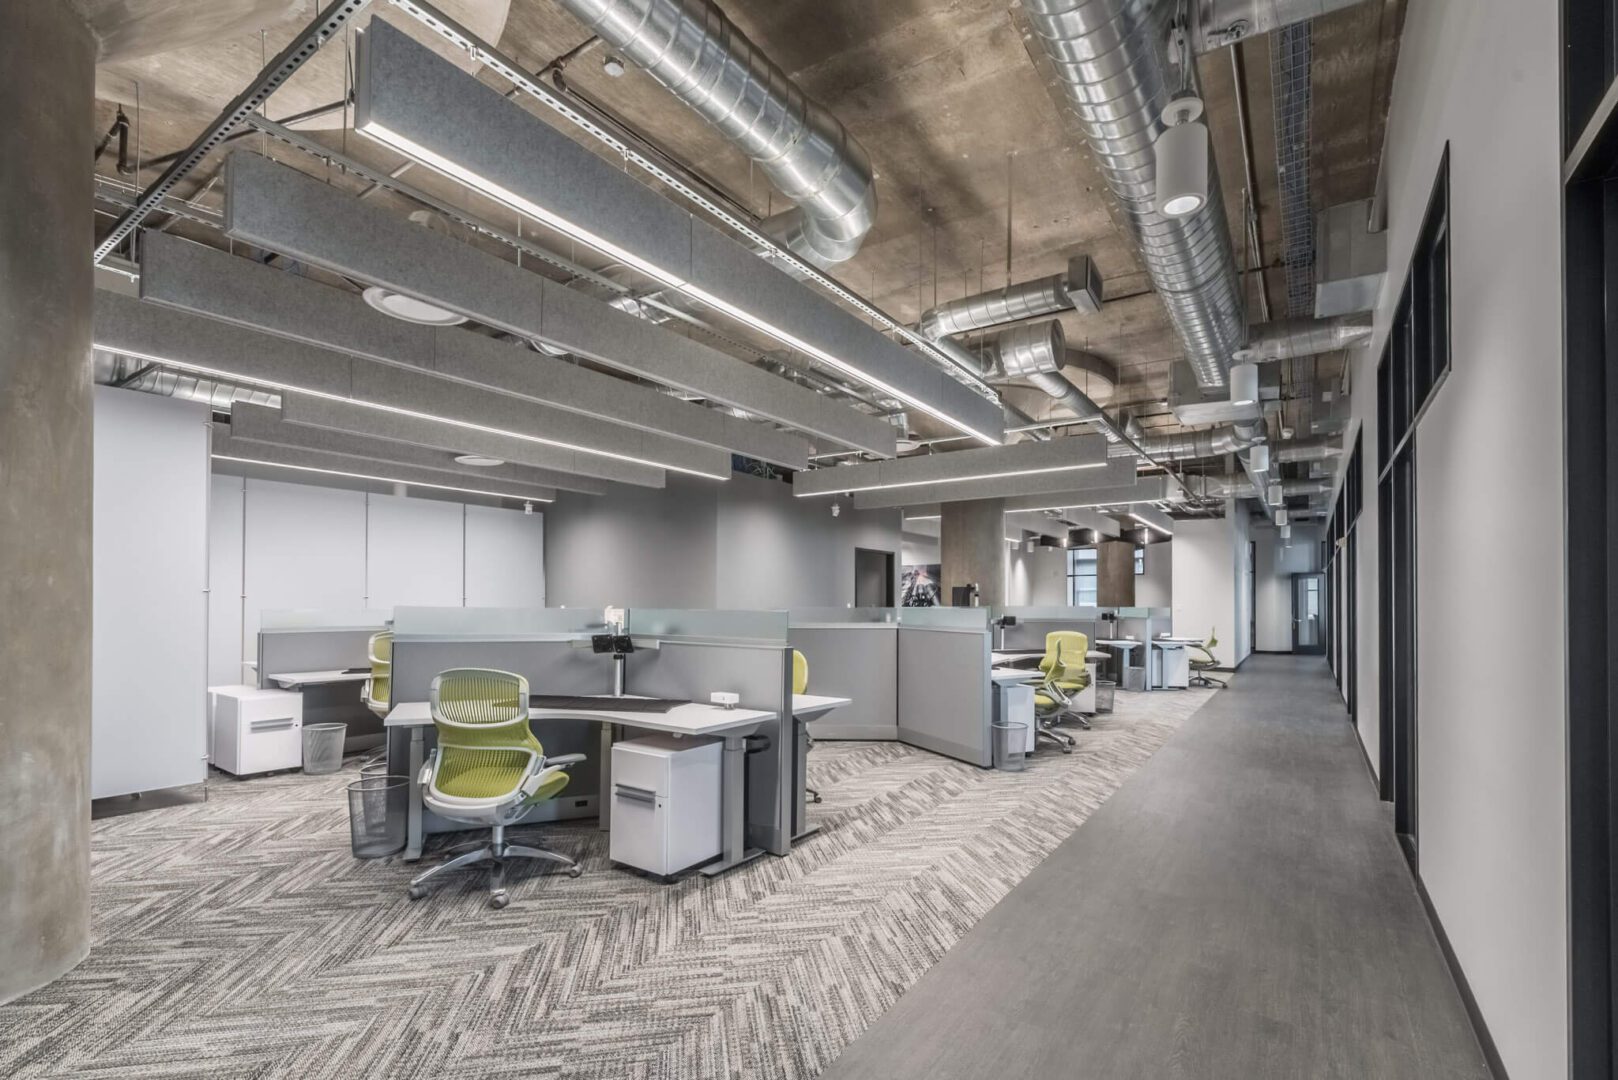 A large open office space with many cubicles.